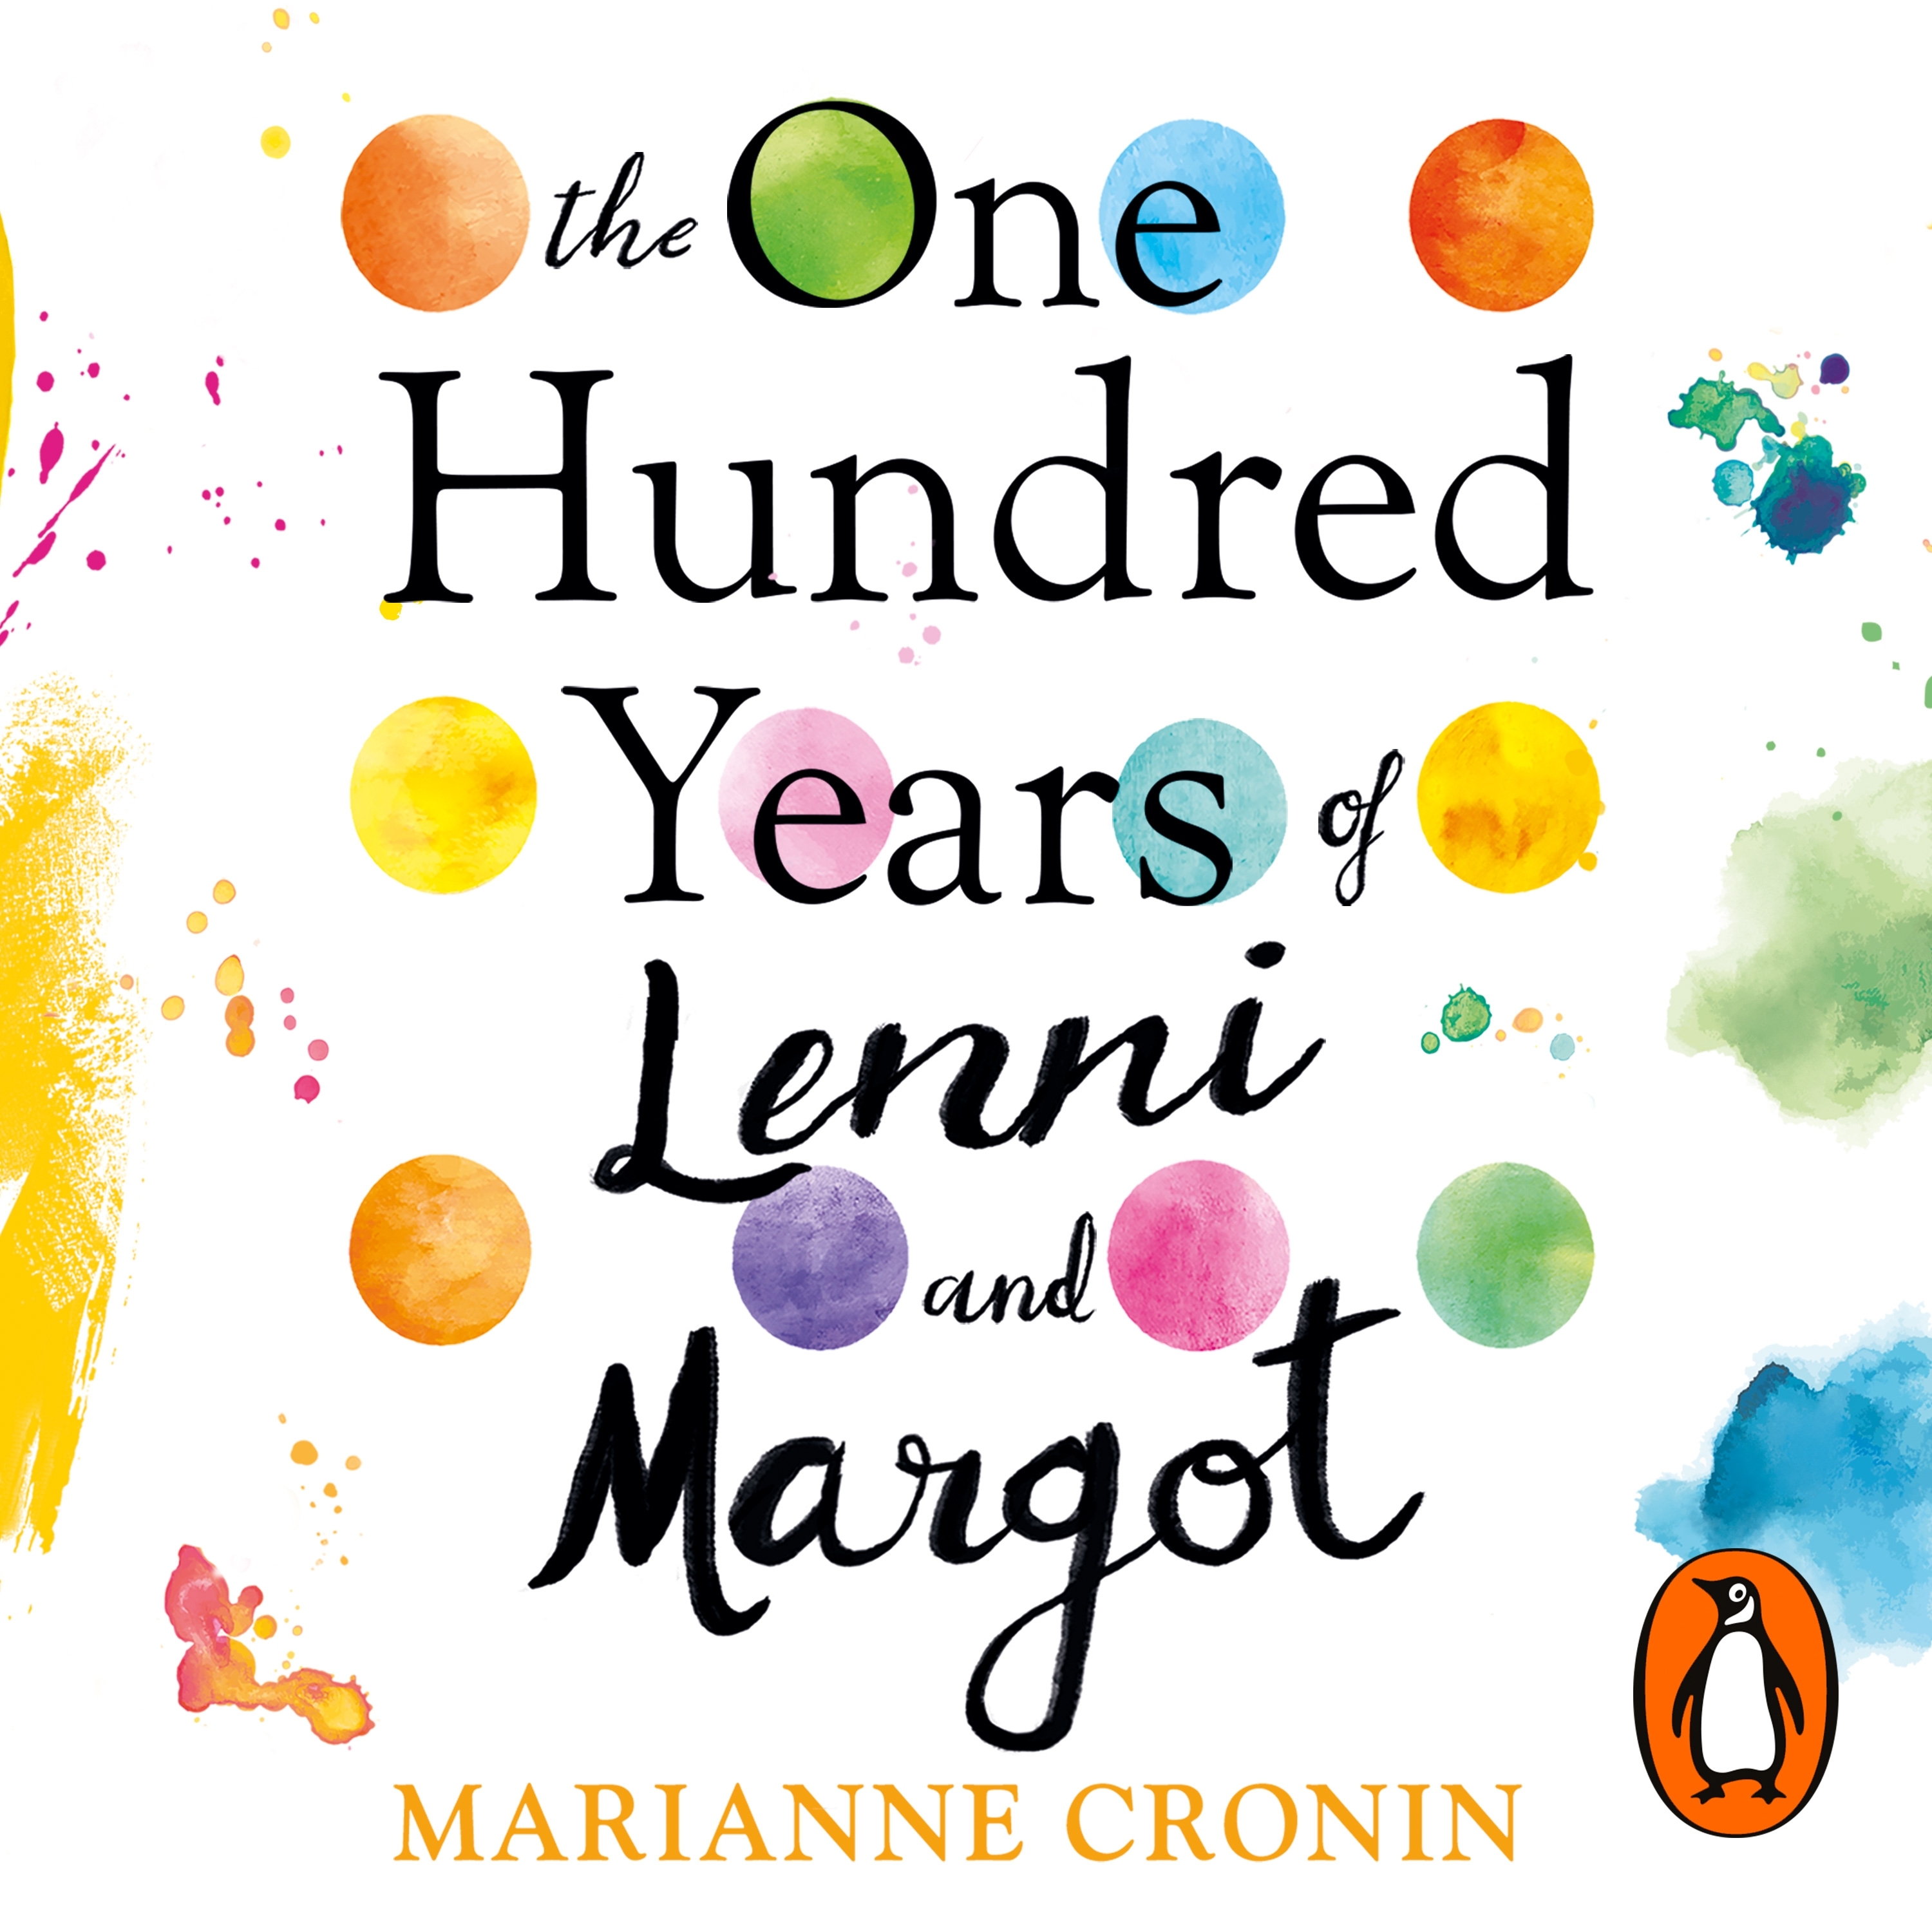 book review one hundred years of lenni and margot